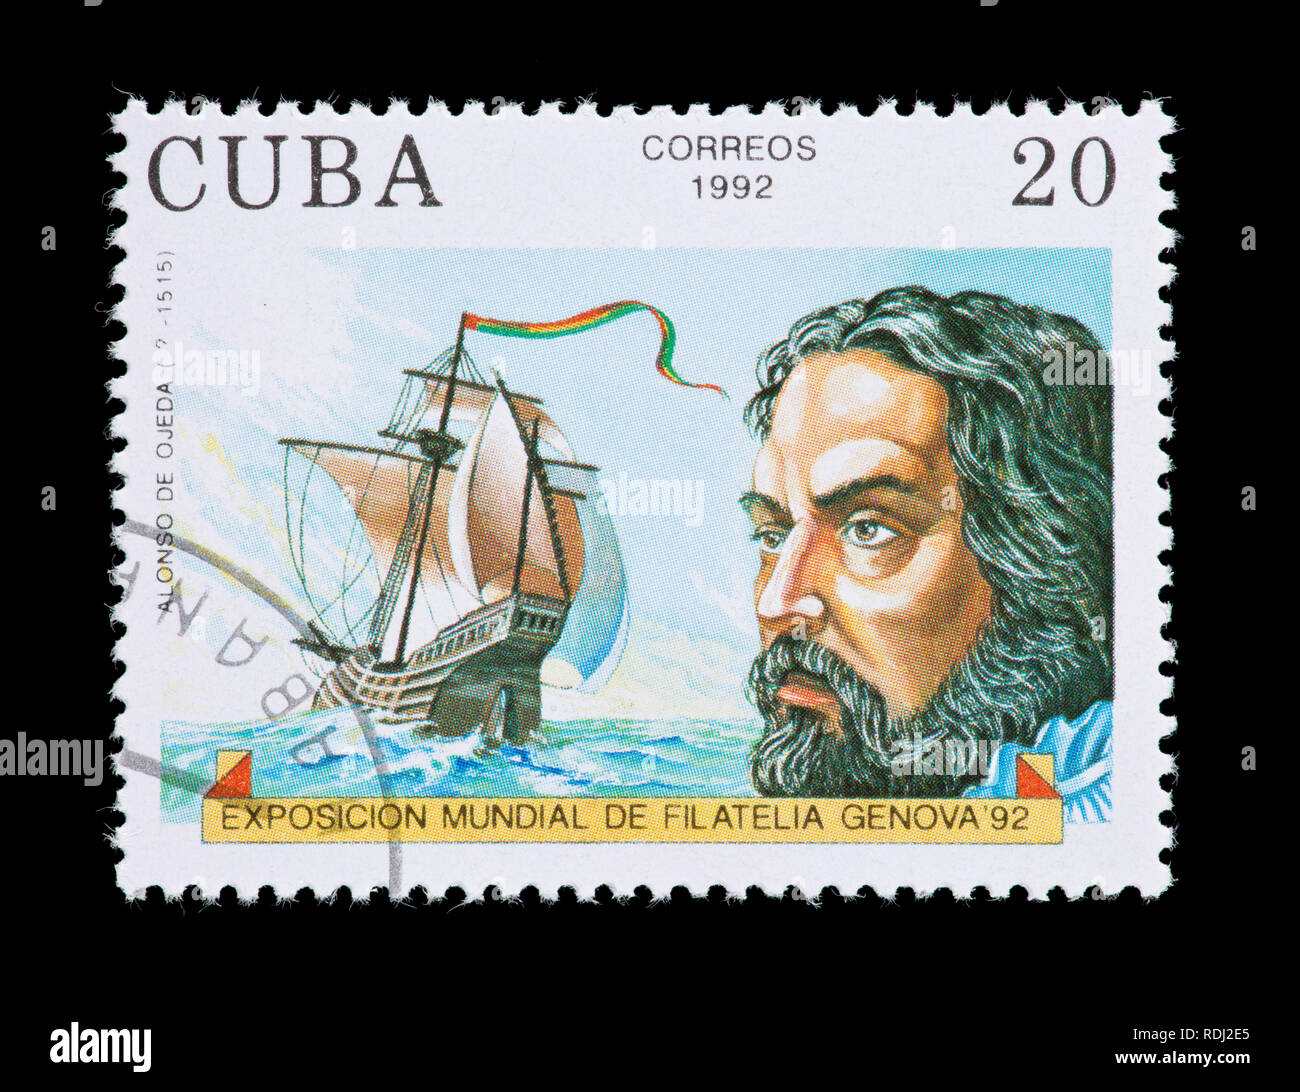 Postage stamp from Cuba depicting Alonso de Ojeda. Stock Photo